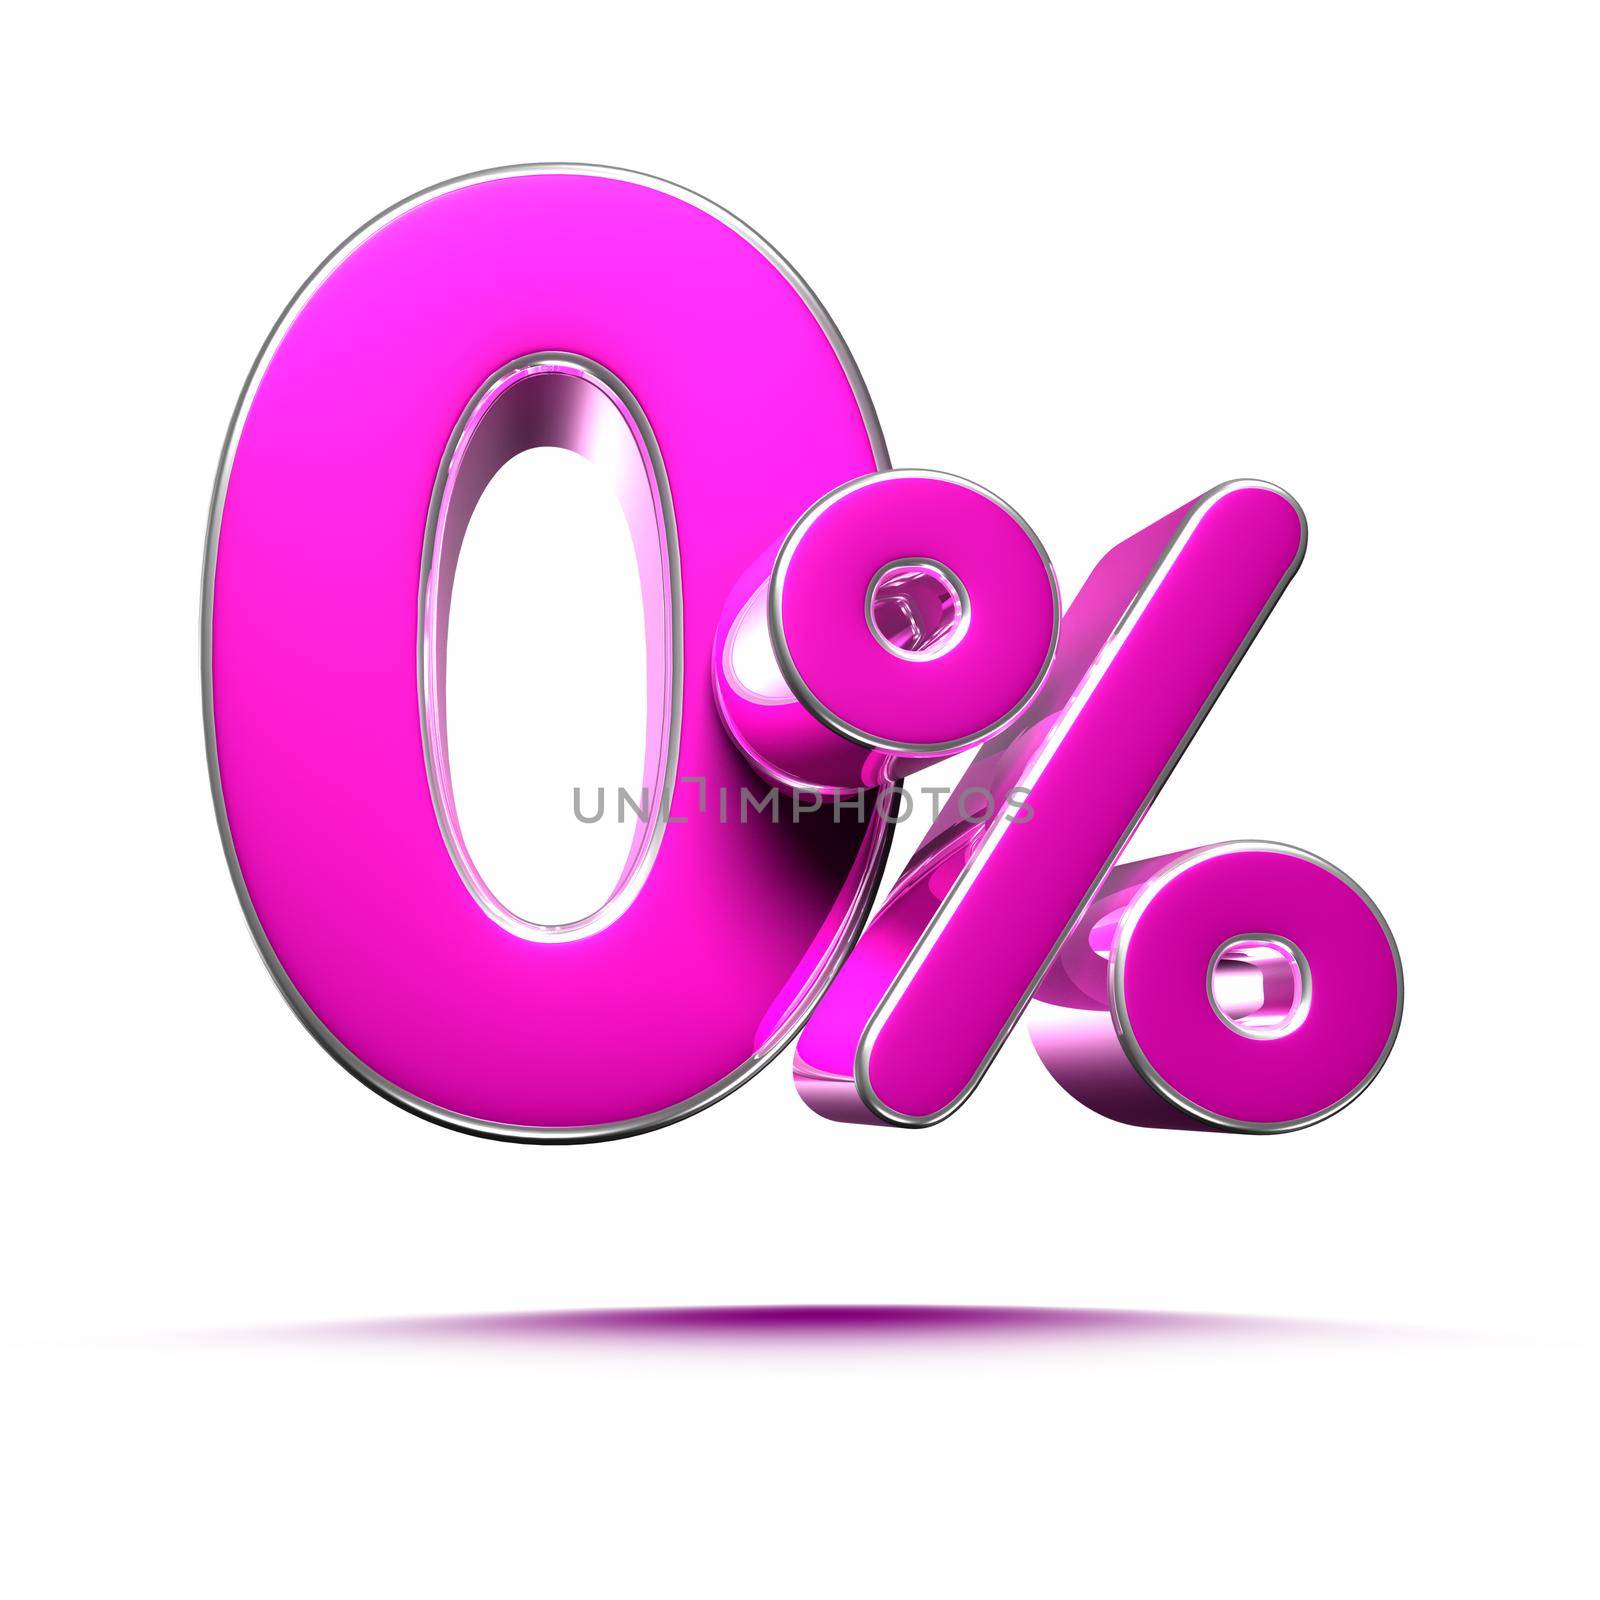 Pink 0 Percent 3d illustration Sign on White Background, Special Offer 0% Discount Tag, Sale Up to 0 Percent Off,share 0 percent,0% off storewide.With clipping path. by thitimontoyai